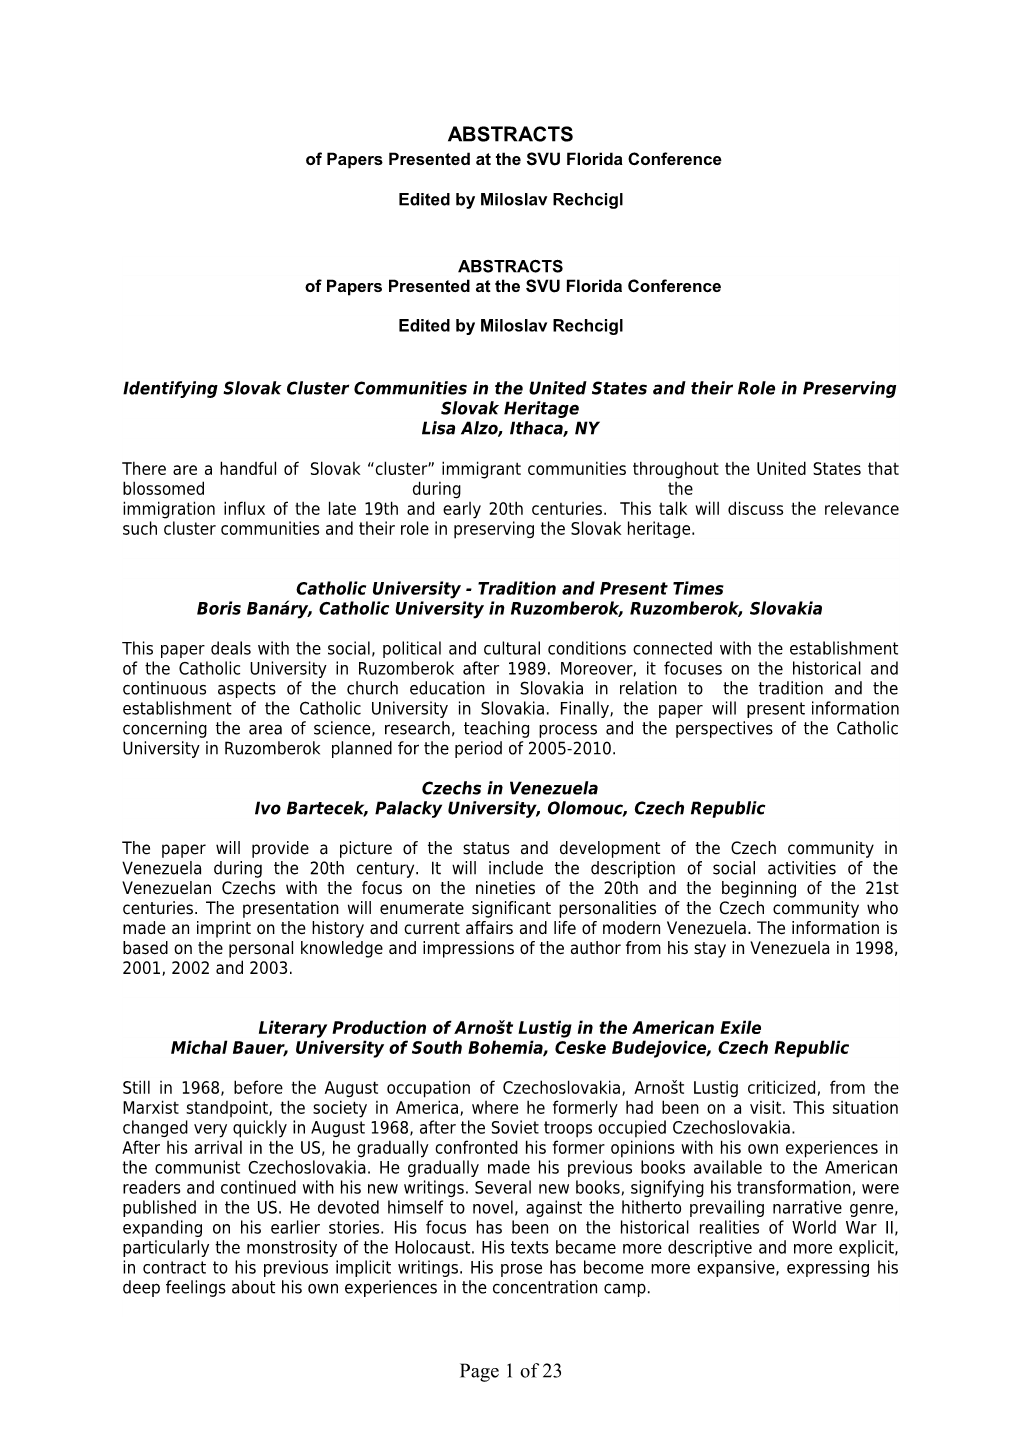 Of Papers Presented at the SVU Florida Conference